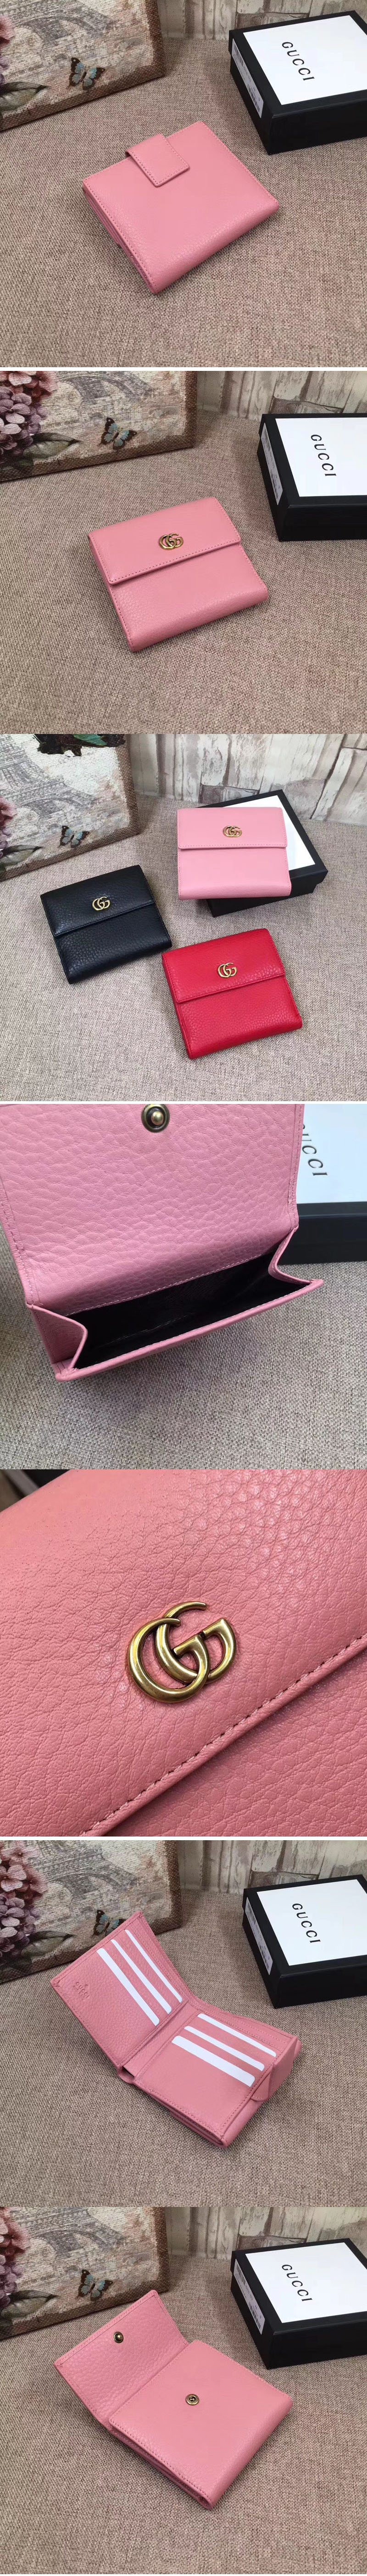 Replica Gucci 456122 Leather french flap wallet Pink